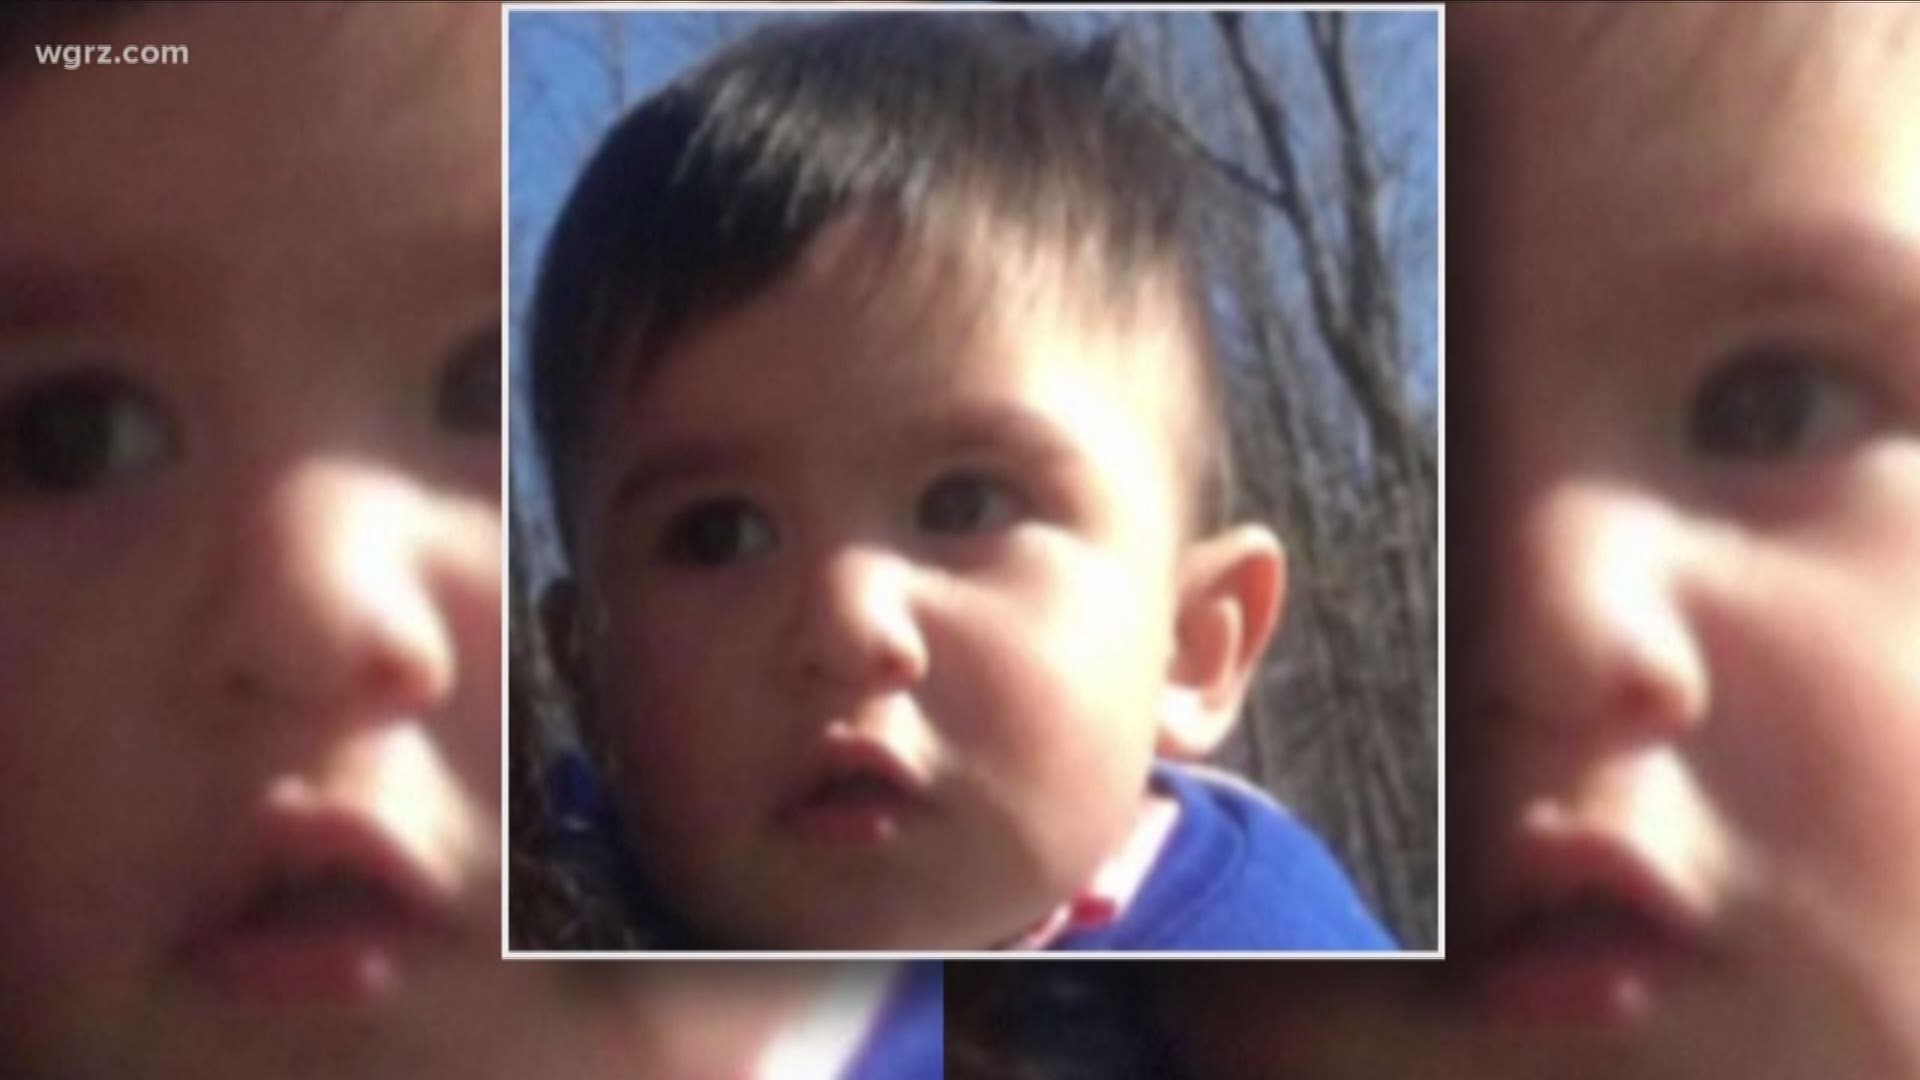 Search For Missing Toddler Now In Sixth Day